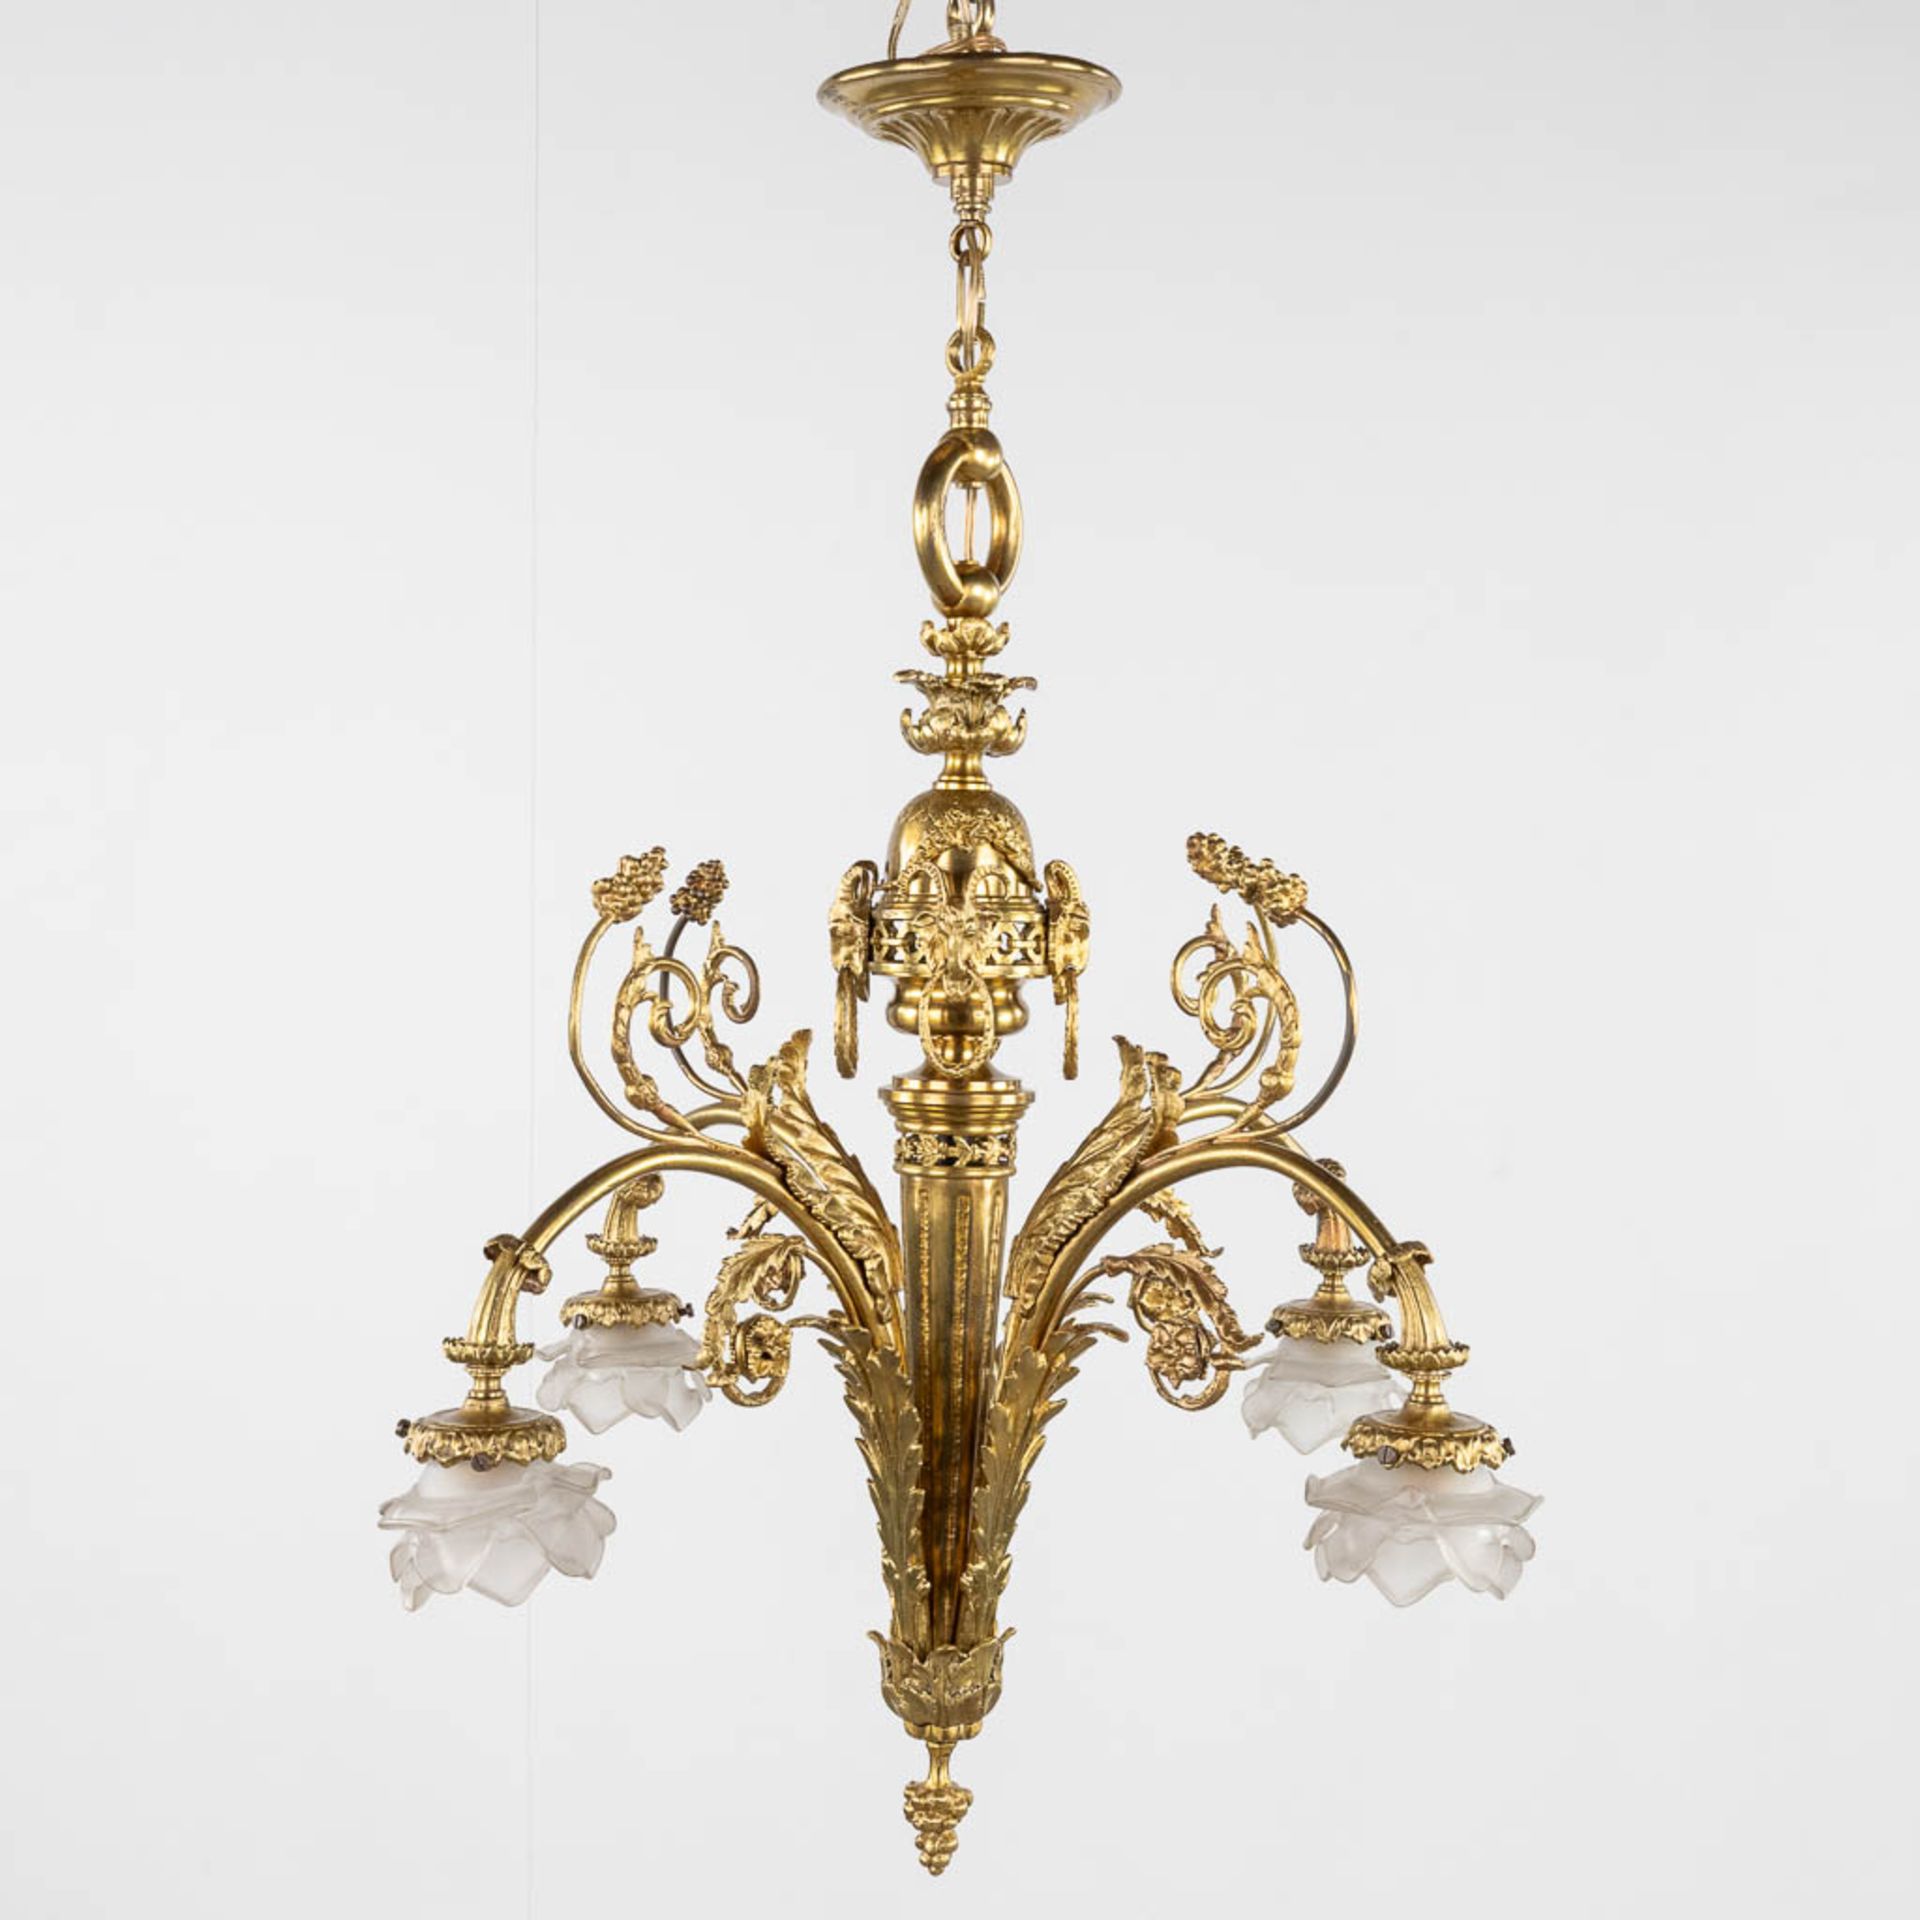 A chandelier, bronze finished with ram's heads, Louis XVI style. (H:93 x D:66 cm)